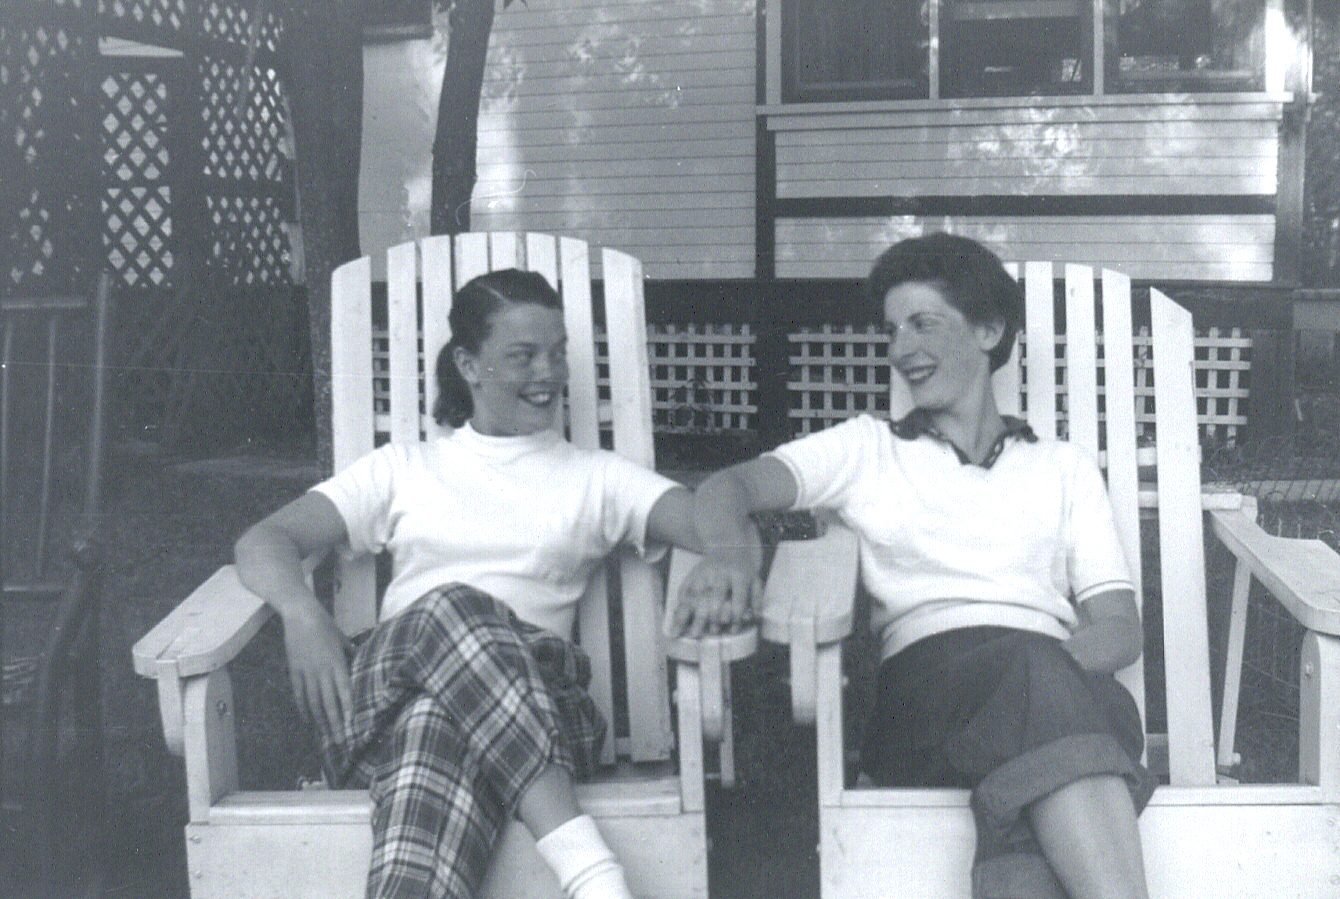 Frances and her best friend in 1955